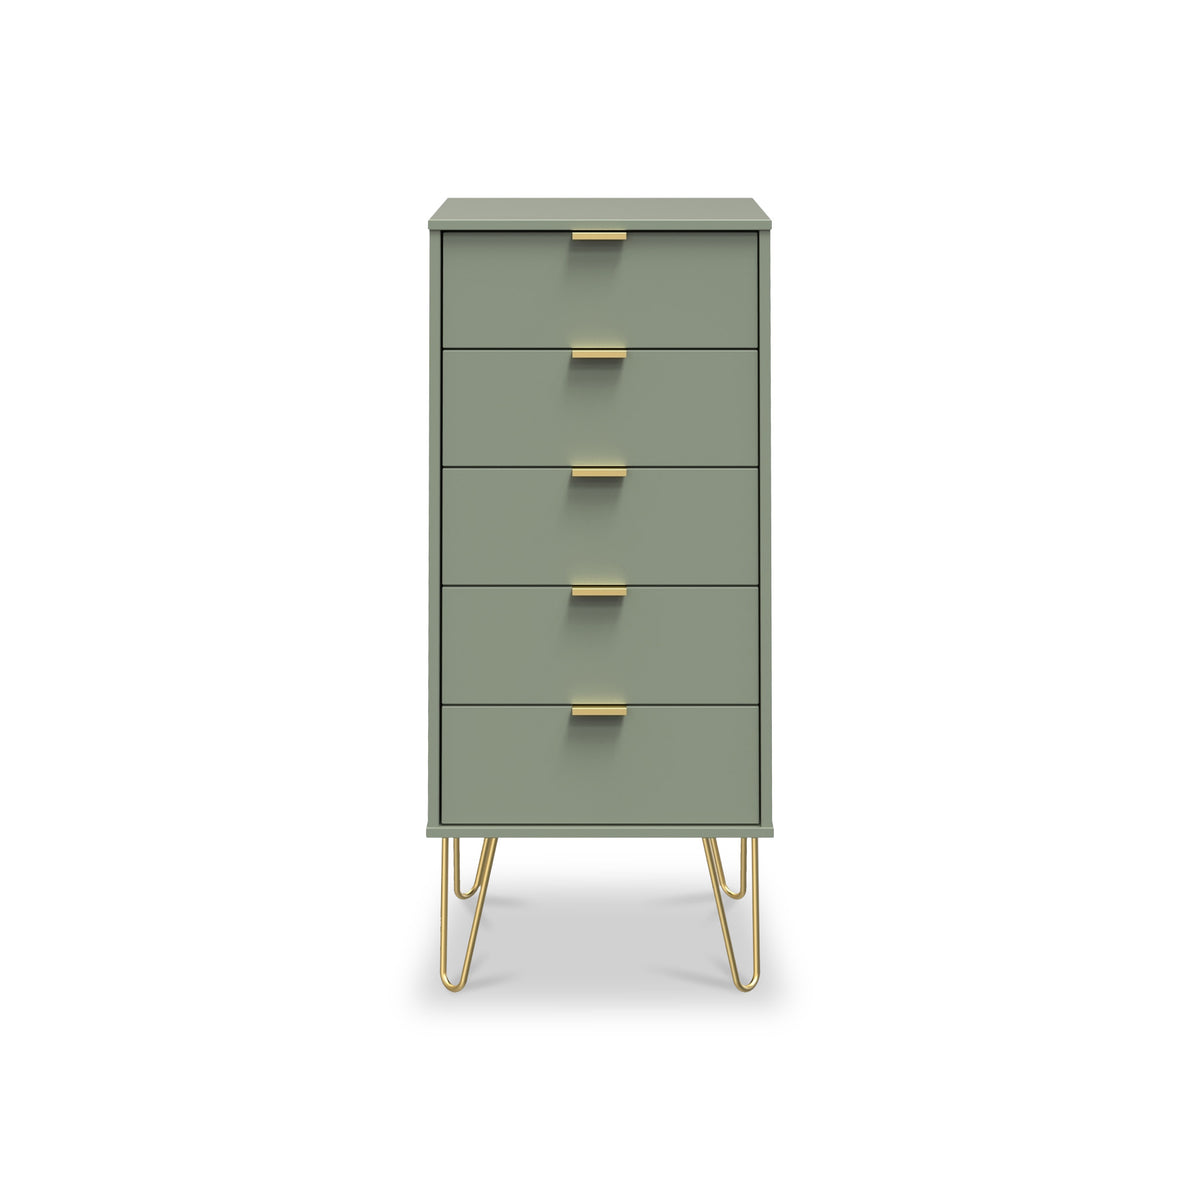 Moreno Olive Green 5 Drawer Tallboy Chest with Gold Hairpin Legs from Roseland Furniture